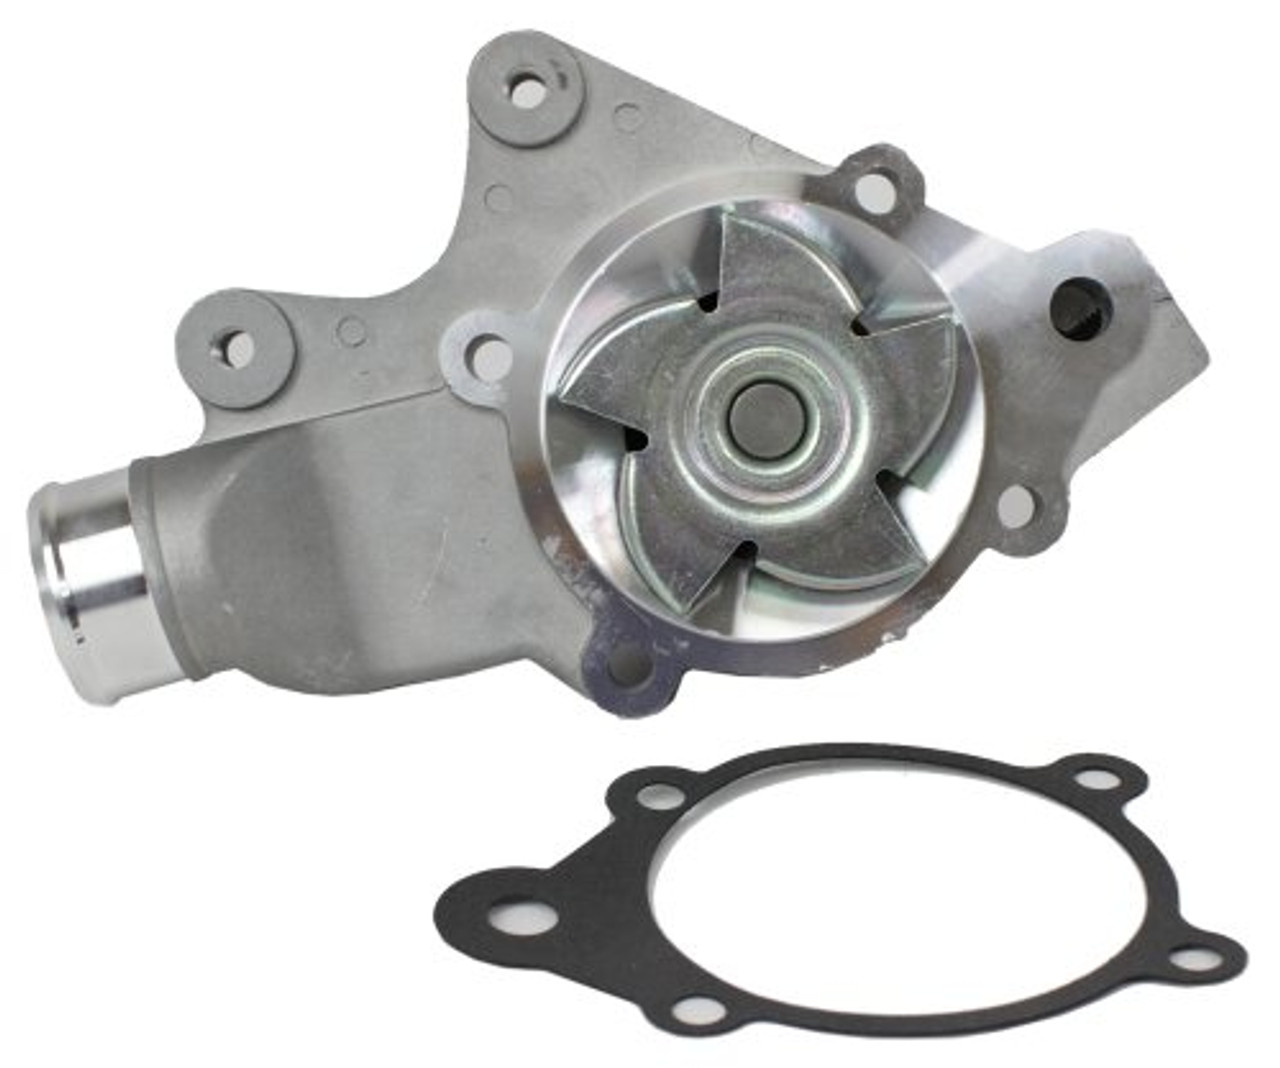 Water Pump - 1993 Jeep Cherokee 4.0L Engine Parts # WP1120ZE7